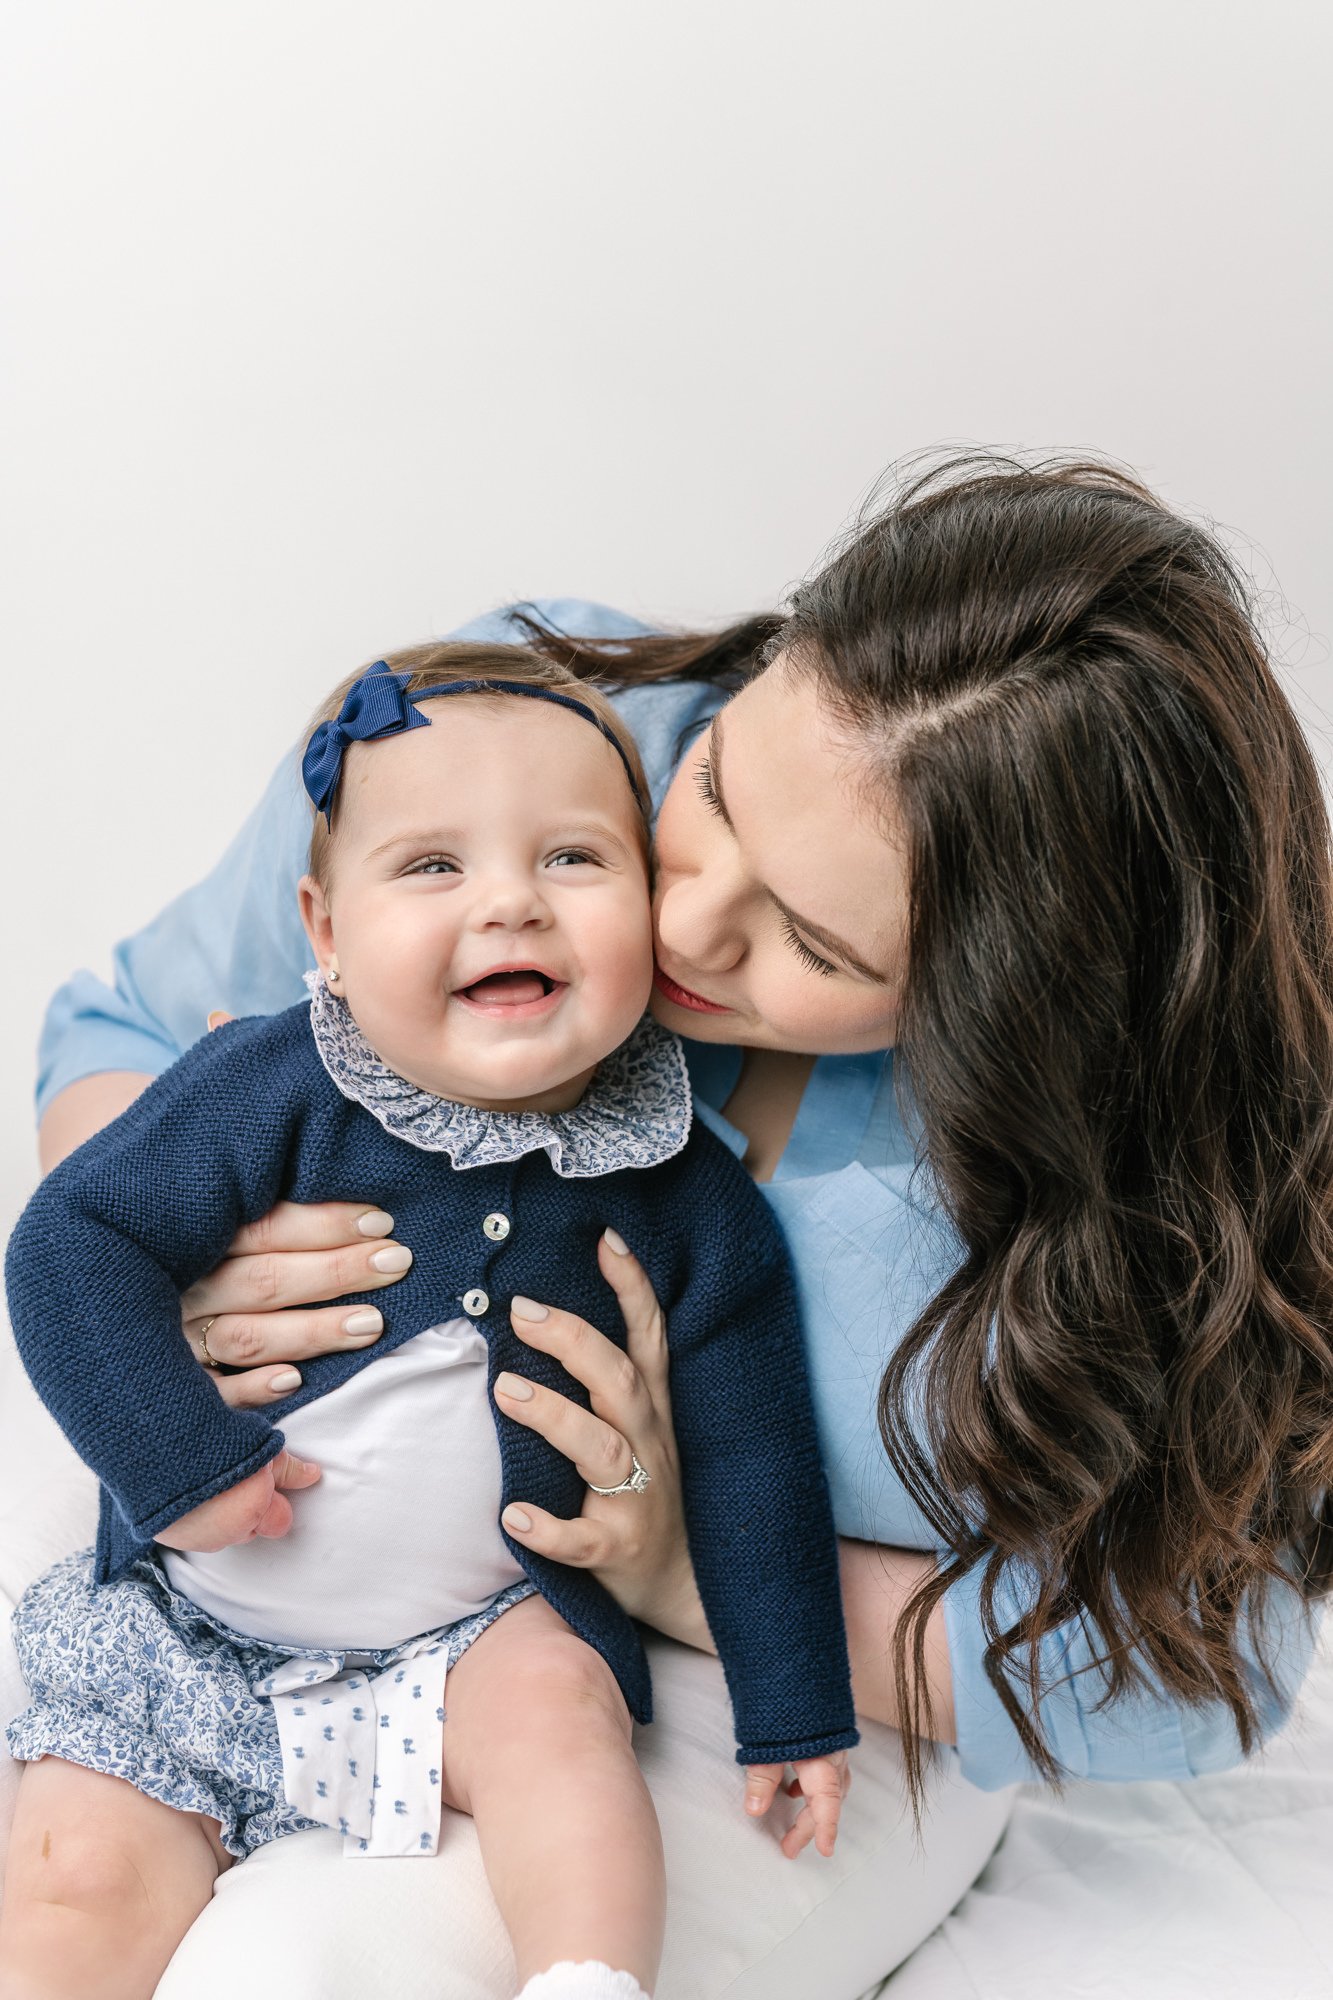  Cutest baby girl sits on her moms lap with a huge smile on her face during Nicole Hawkins Photography session in New Jersey. Mom leans in to kiss daughter’s face. Both are wearing blue. #babystudioportraits #studionewborns #NewJerseyPhotographers #N